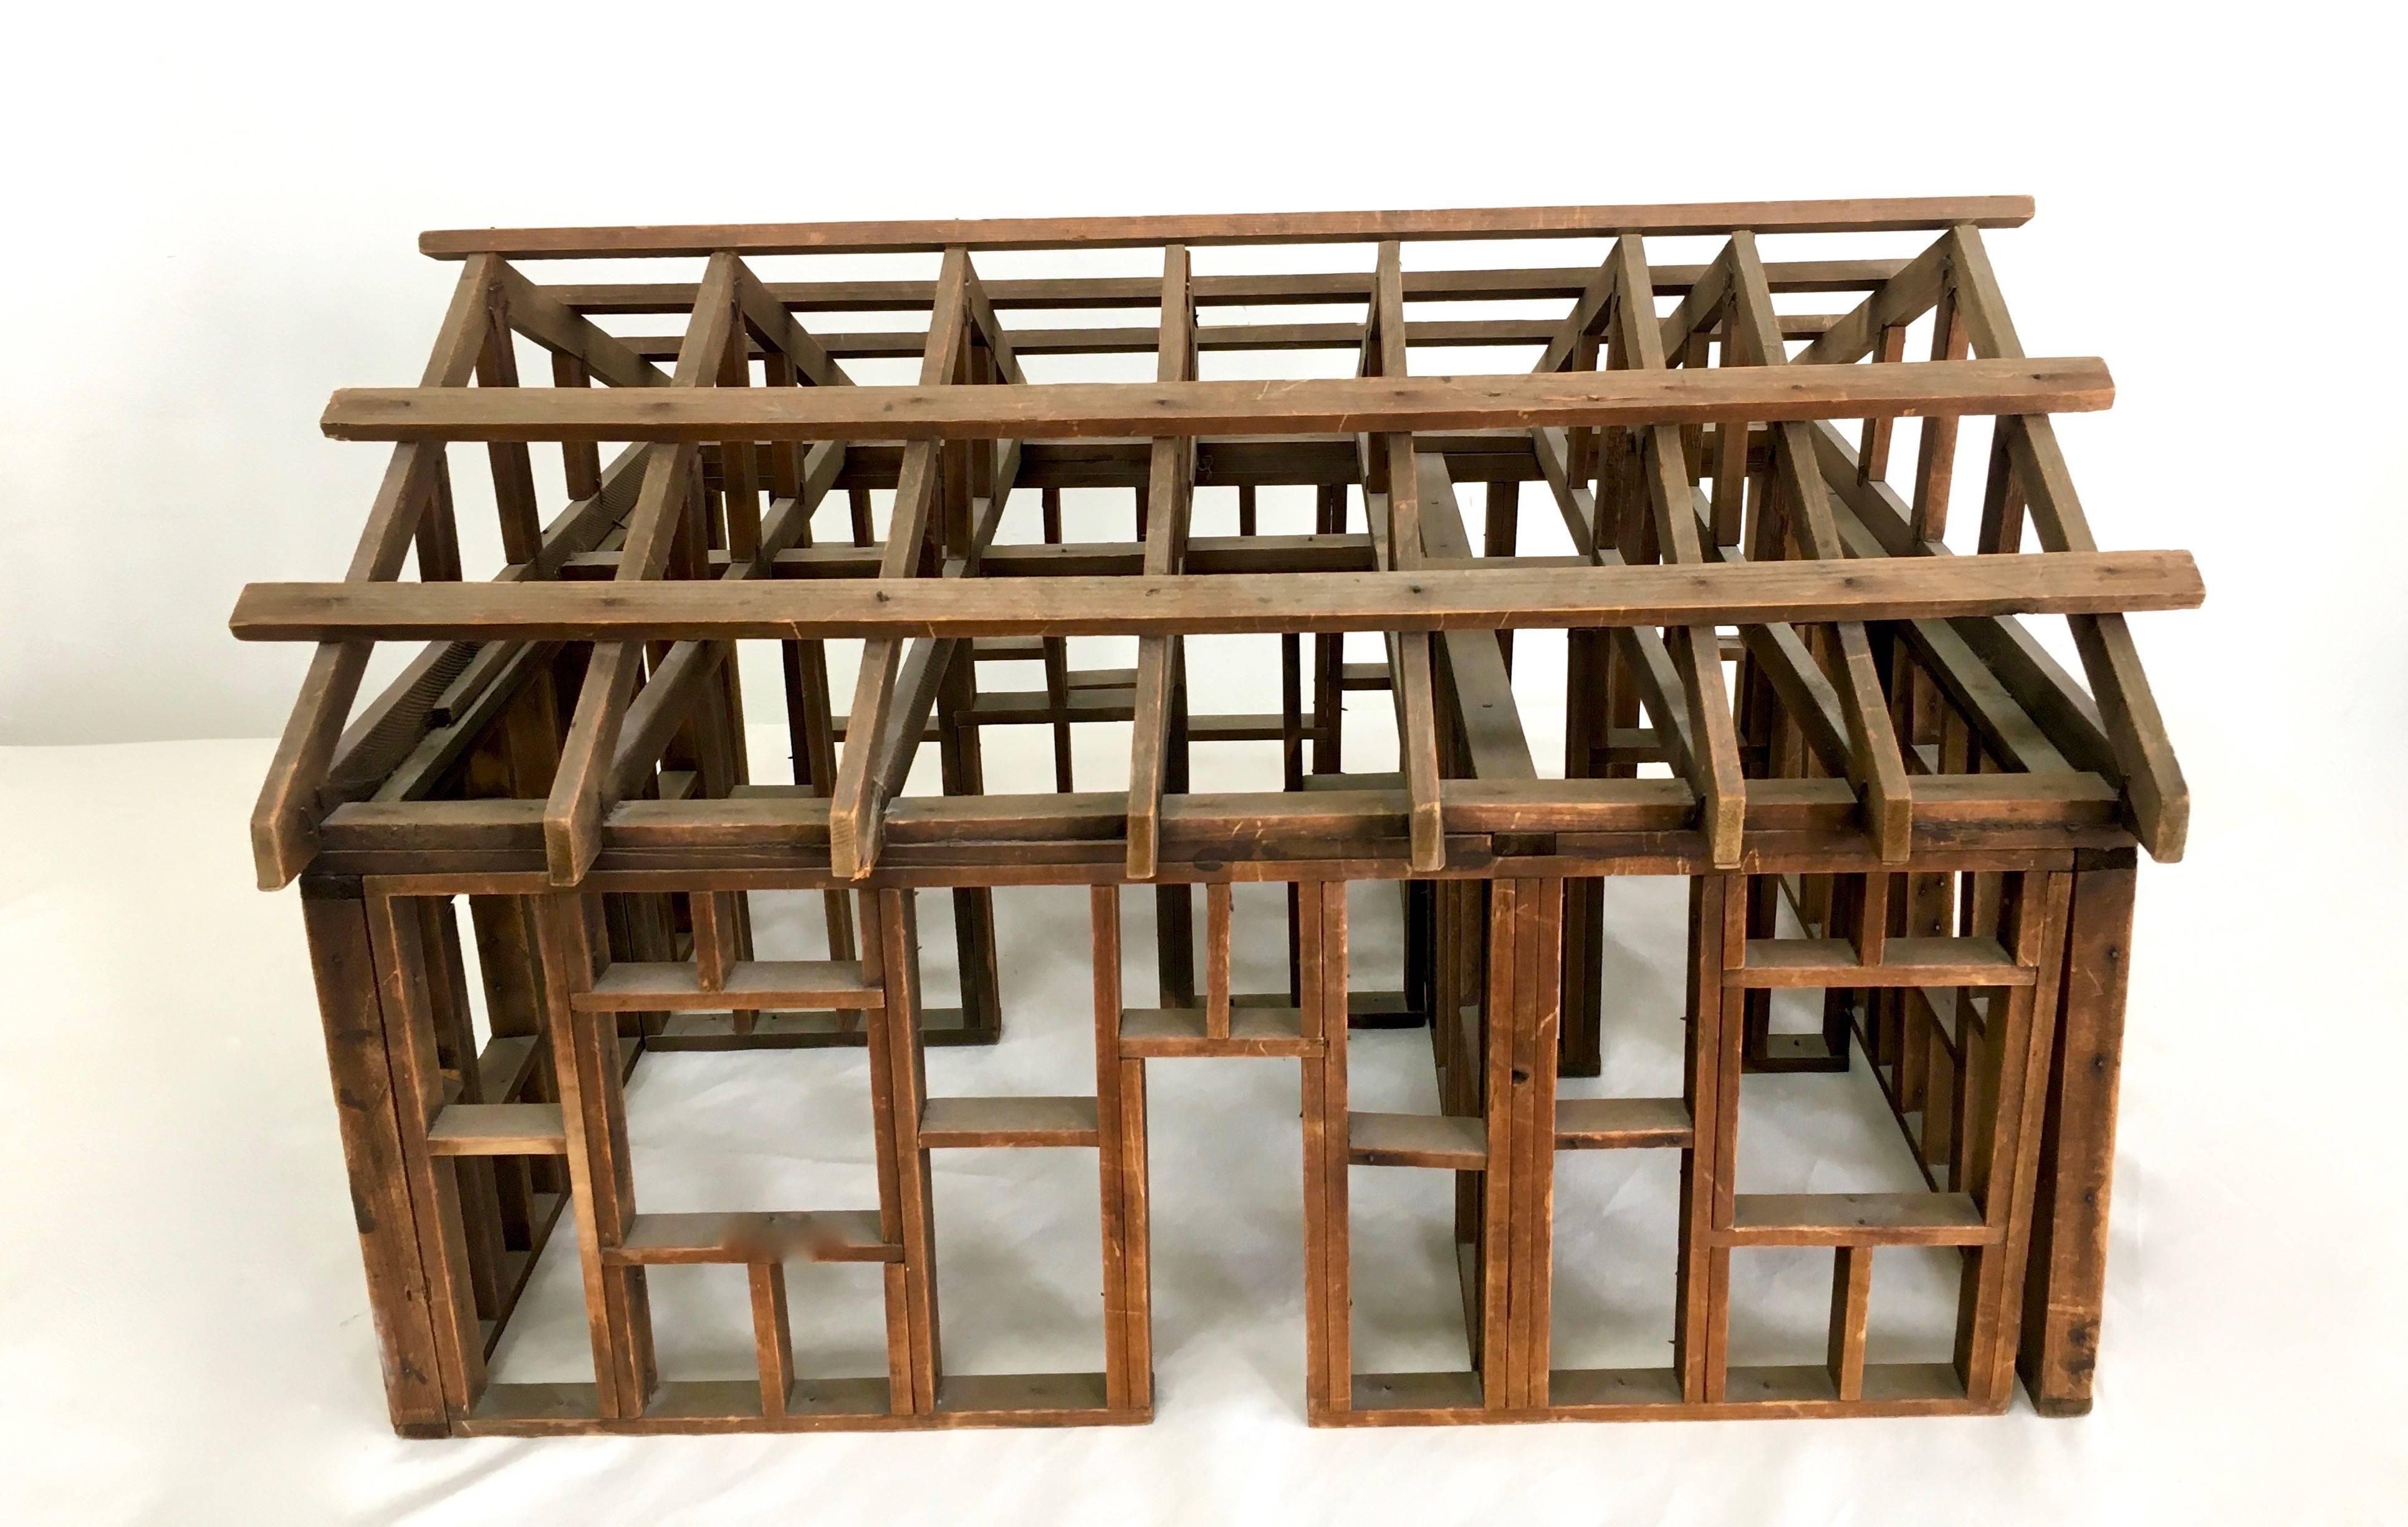 A Folk Art framework of a house. Simple, yet very sophisticated

The model, as a stand alone decorative structure, is a compliment to a large coffee or console table or perfect in a room near a light source to cast shadows on a nearby wall as a